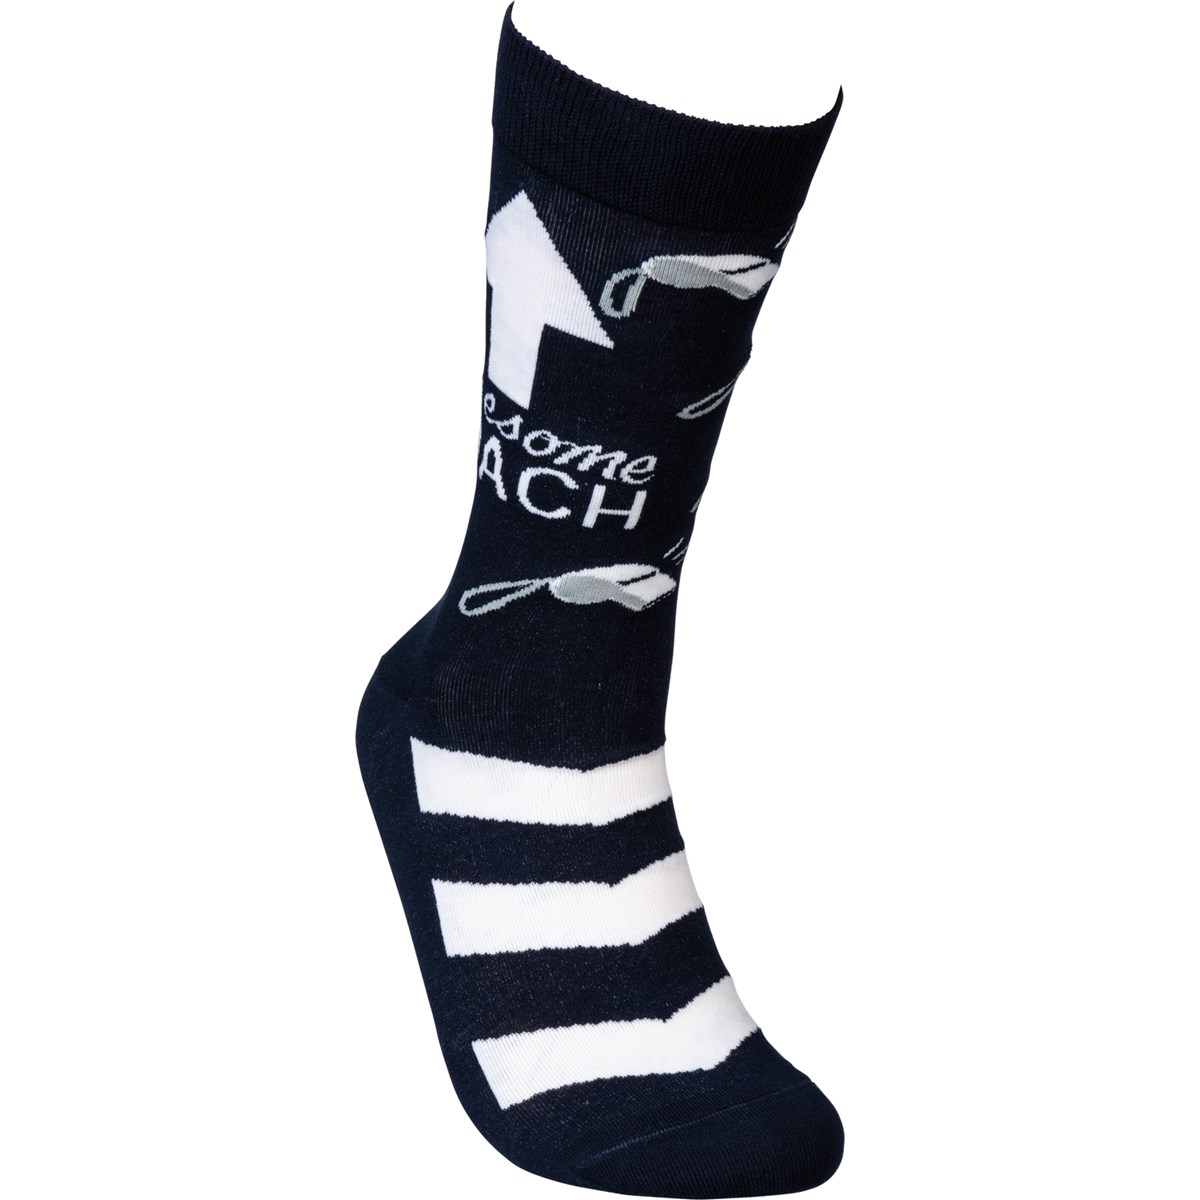 Socks - Awesome Coach - One Size Fits Most - Cotton, Nylon, Spandex